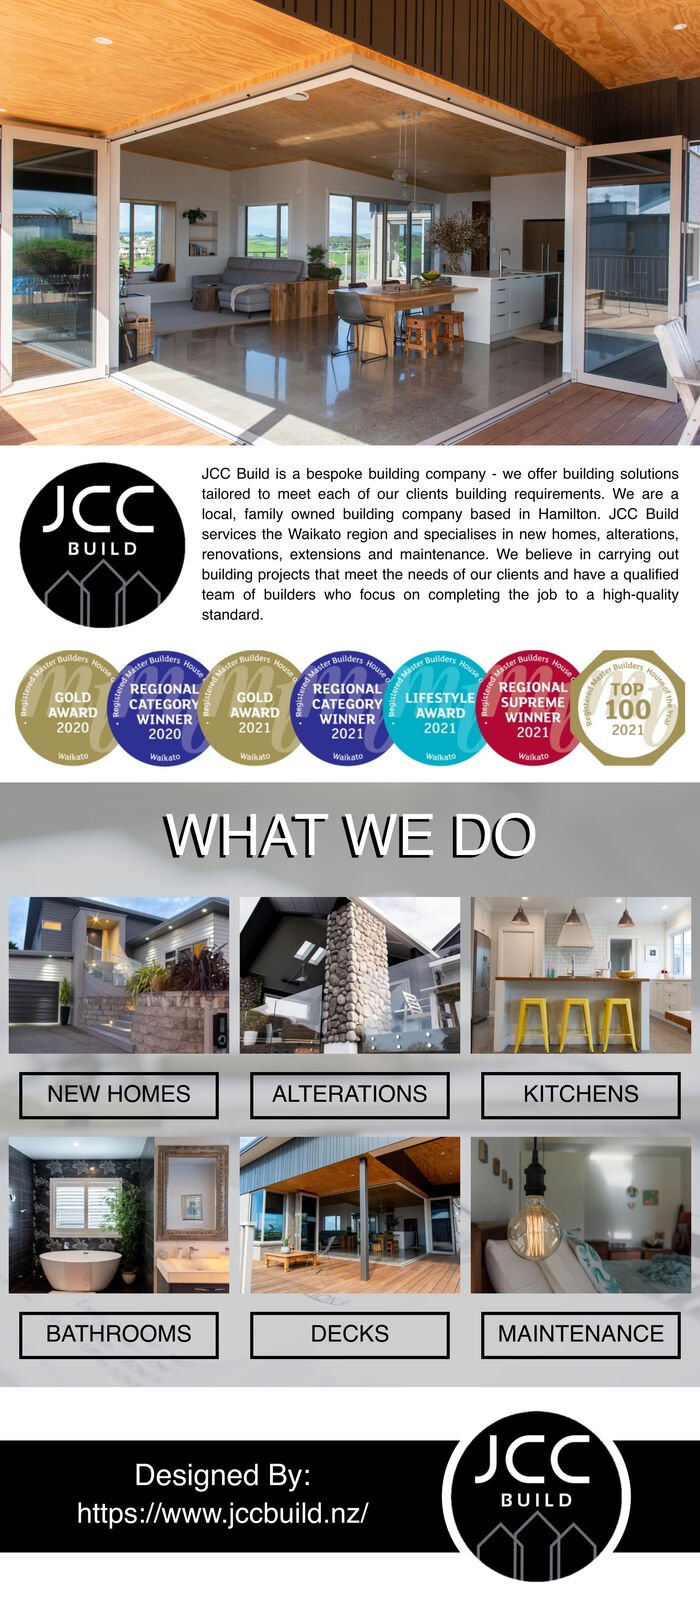 This Infographic is designed by JCC Build